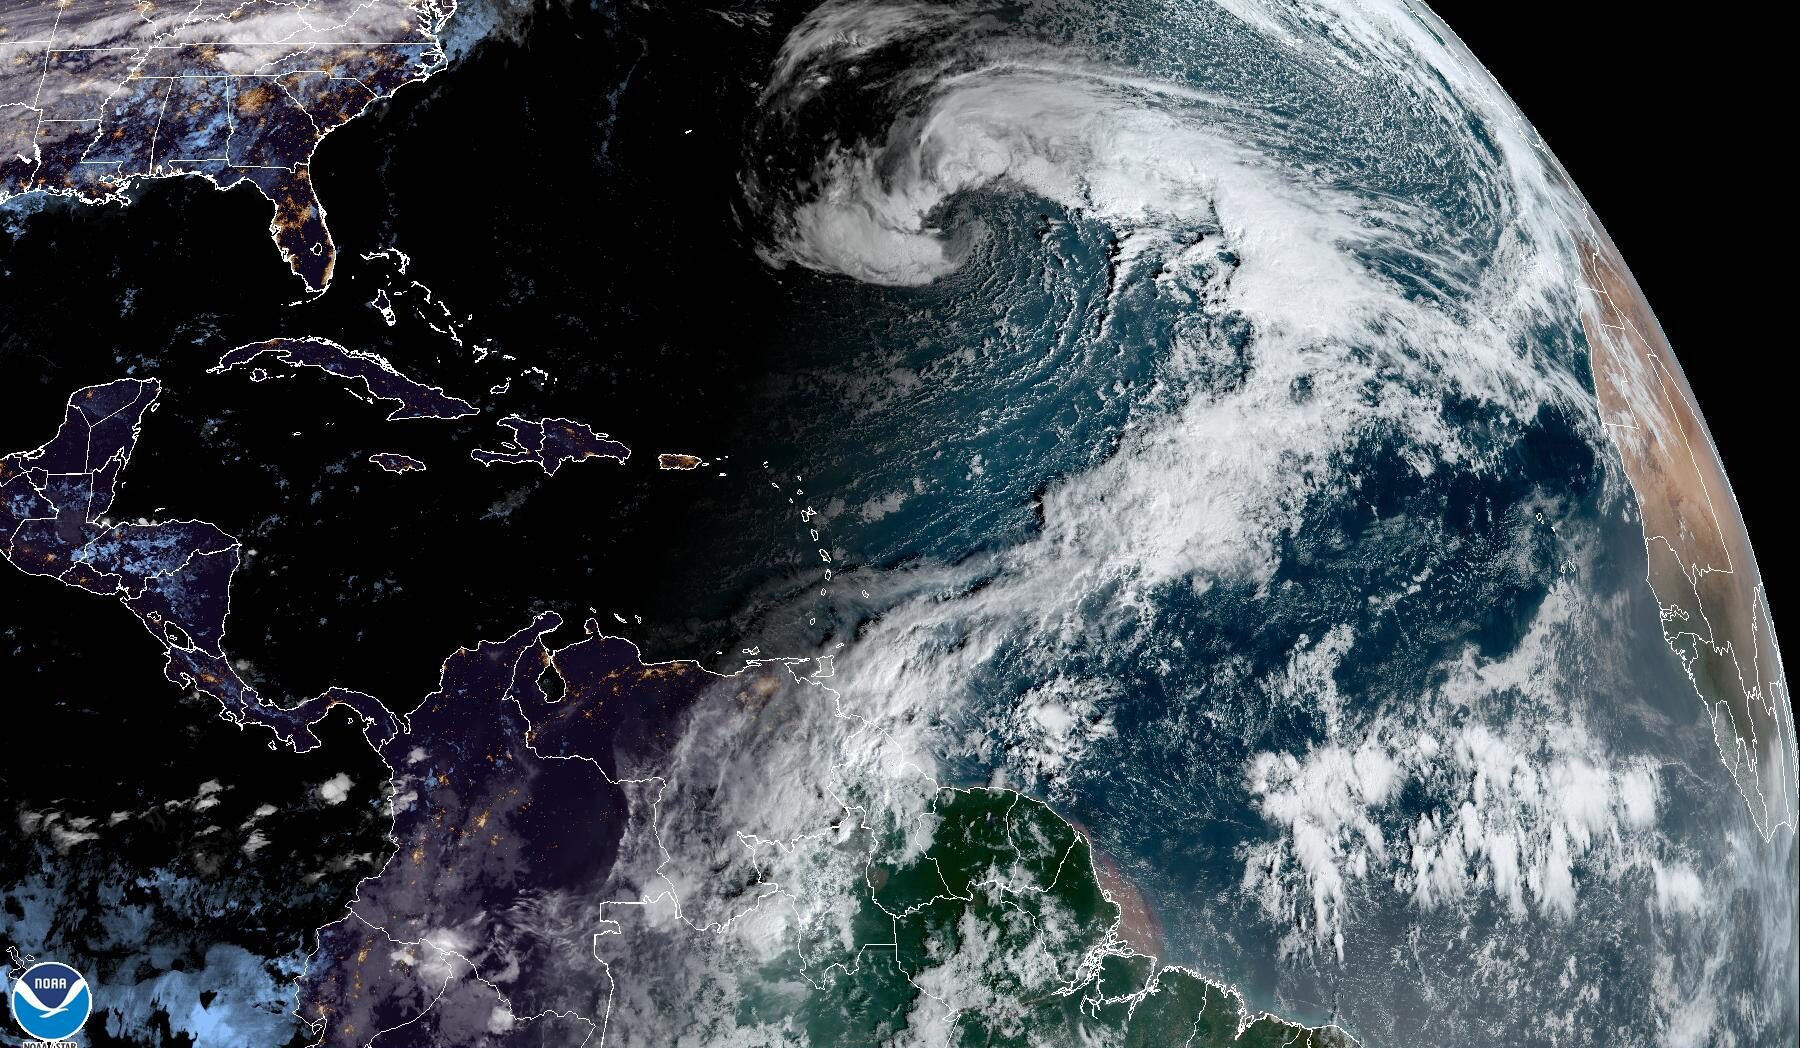 Satellite imagery of the Atlantic on Wednesday. A strong weather system in the central Atlantic will contribute to rough seas across the Atlantic and the Caribbean. The National Hurricane Center is monitoring the system for potential development. (Photo courtesy NHC)